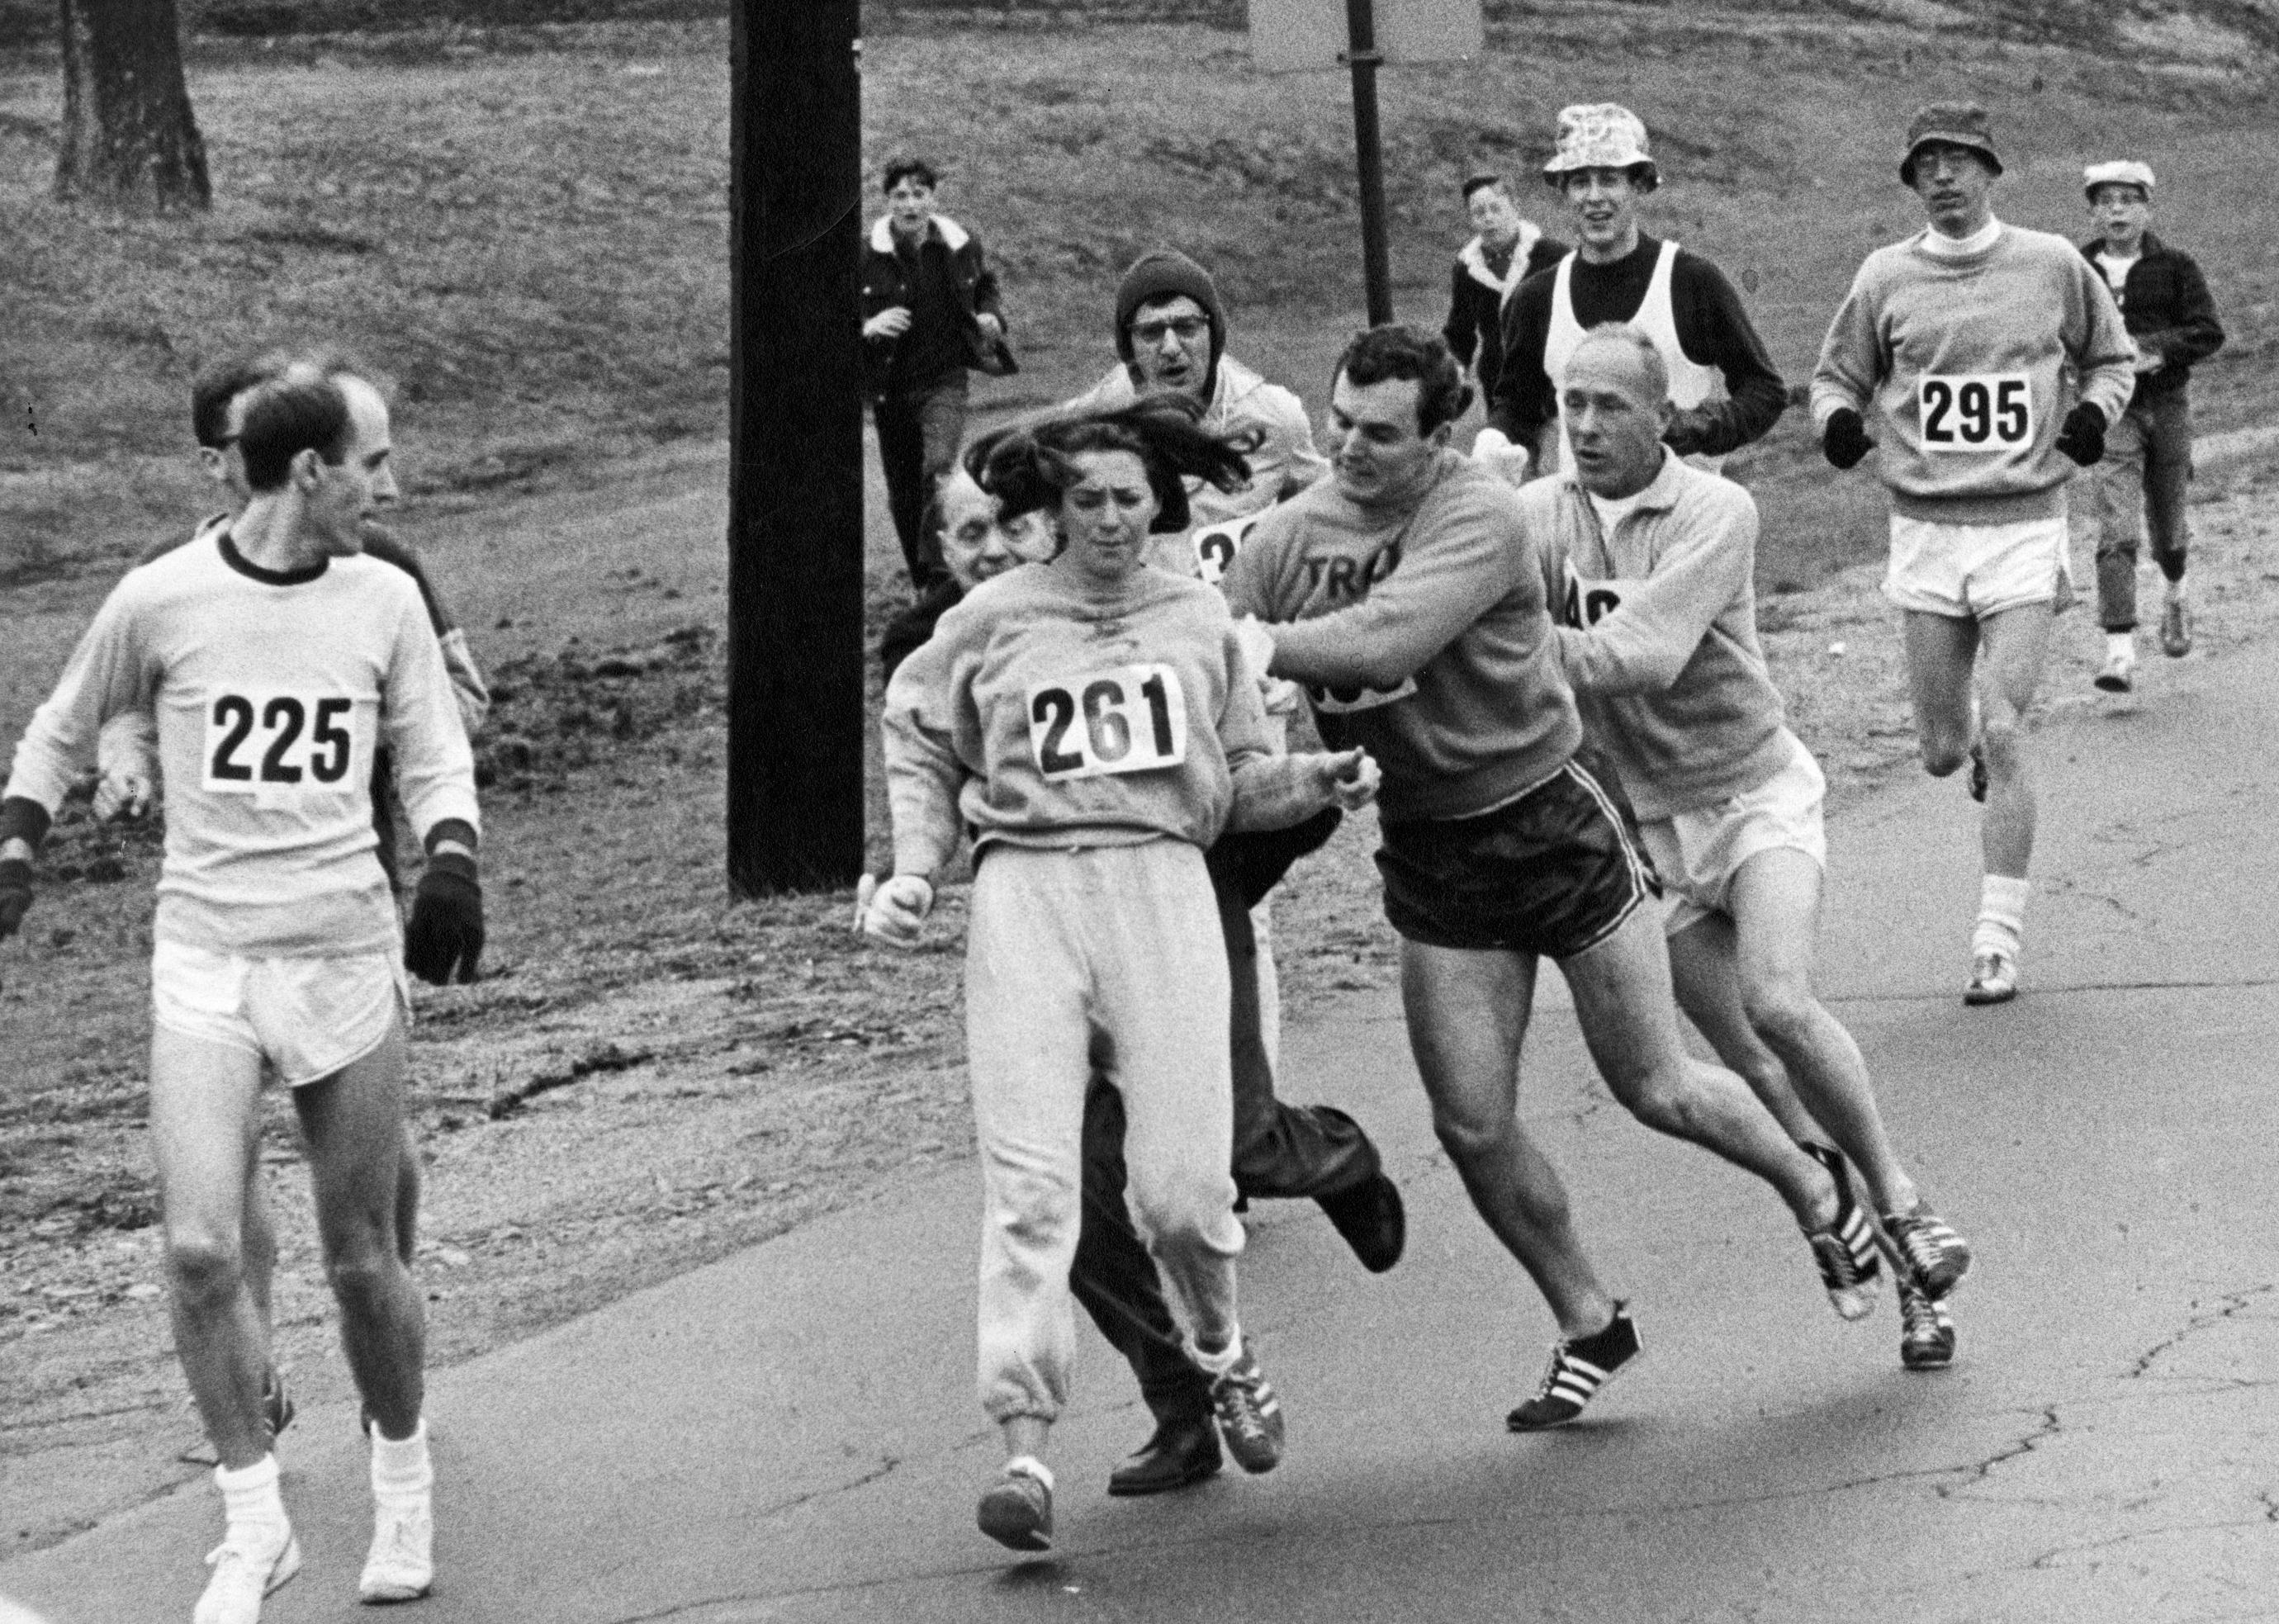 Kathy Switzer roughed up by Jock Semple during the Boston Marathon.